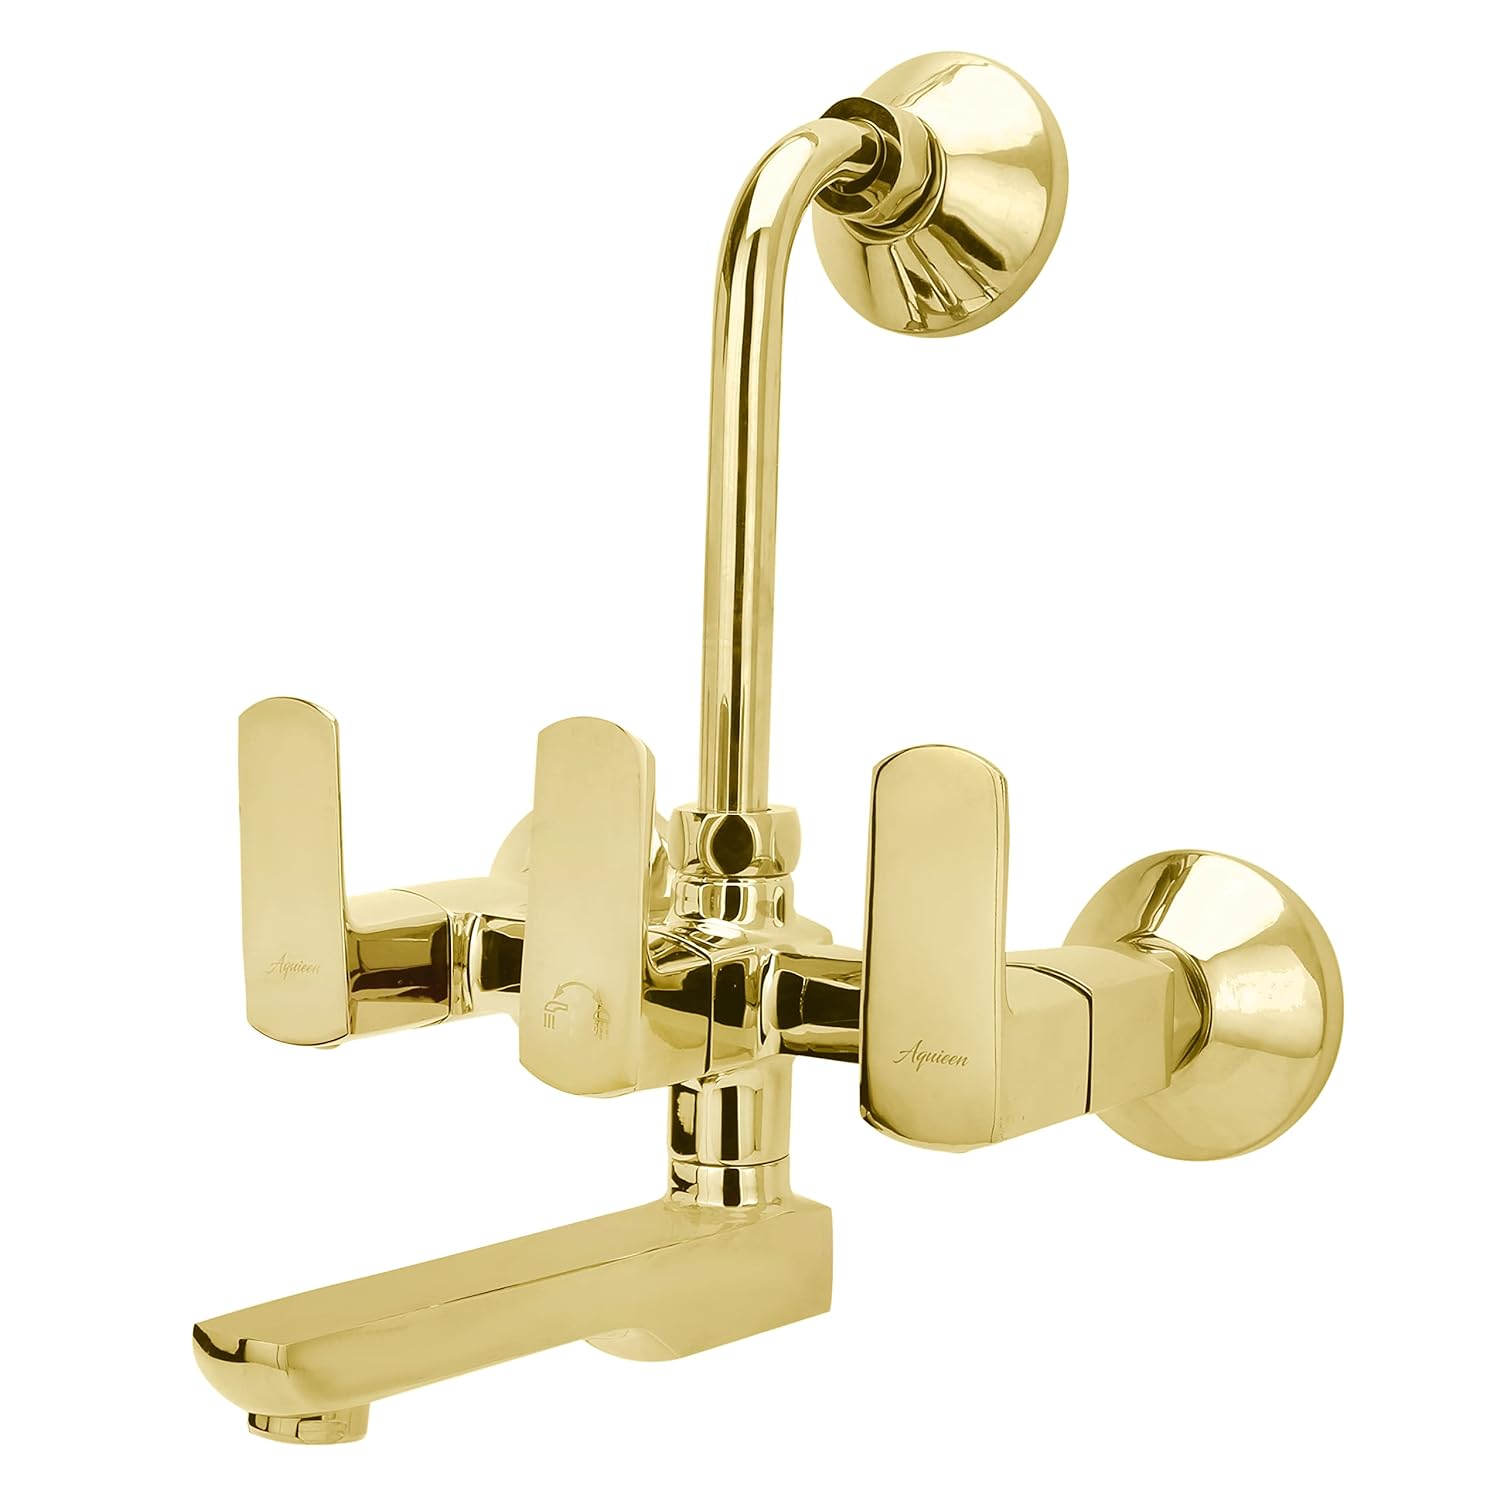 Aquieen Telephonic Wall Mixer with Provision for Overhead Shower with L-Bend & Connecting Legs Zura (Gold)